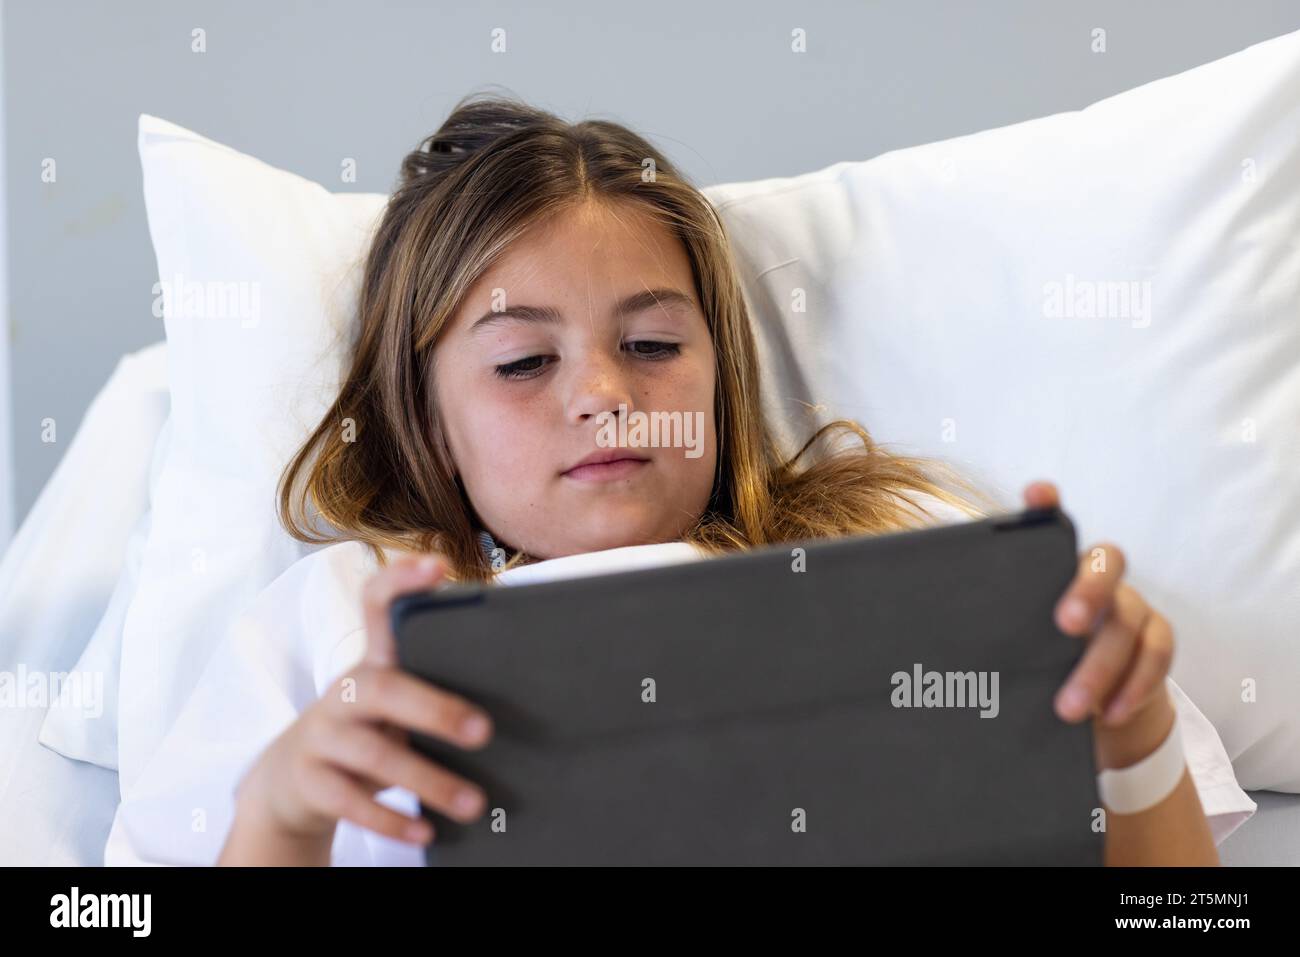 Caucasian girl patient lying in hospital bed using tablet Stock Photo